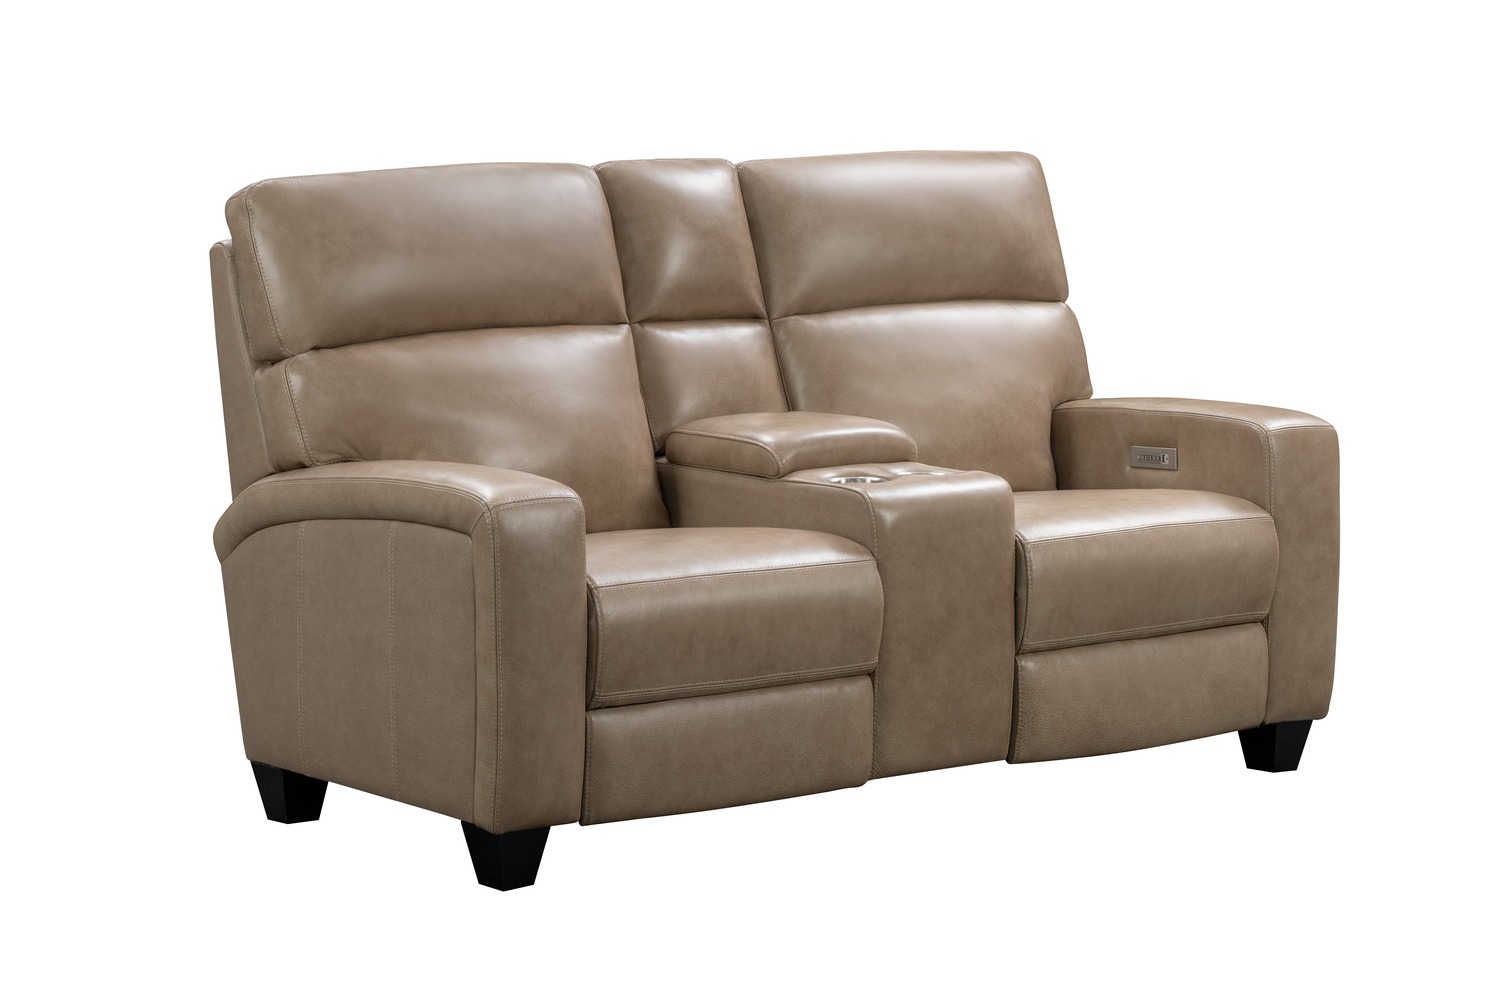 Barcalounger Macello Power Reclining Console Loveseat with Power Head Rests and Power Lumbar - Elliot Taupe/Leather Match